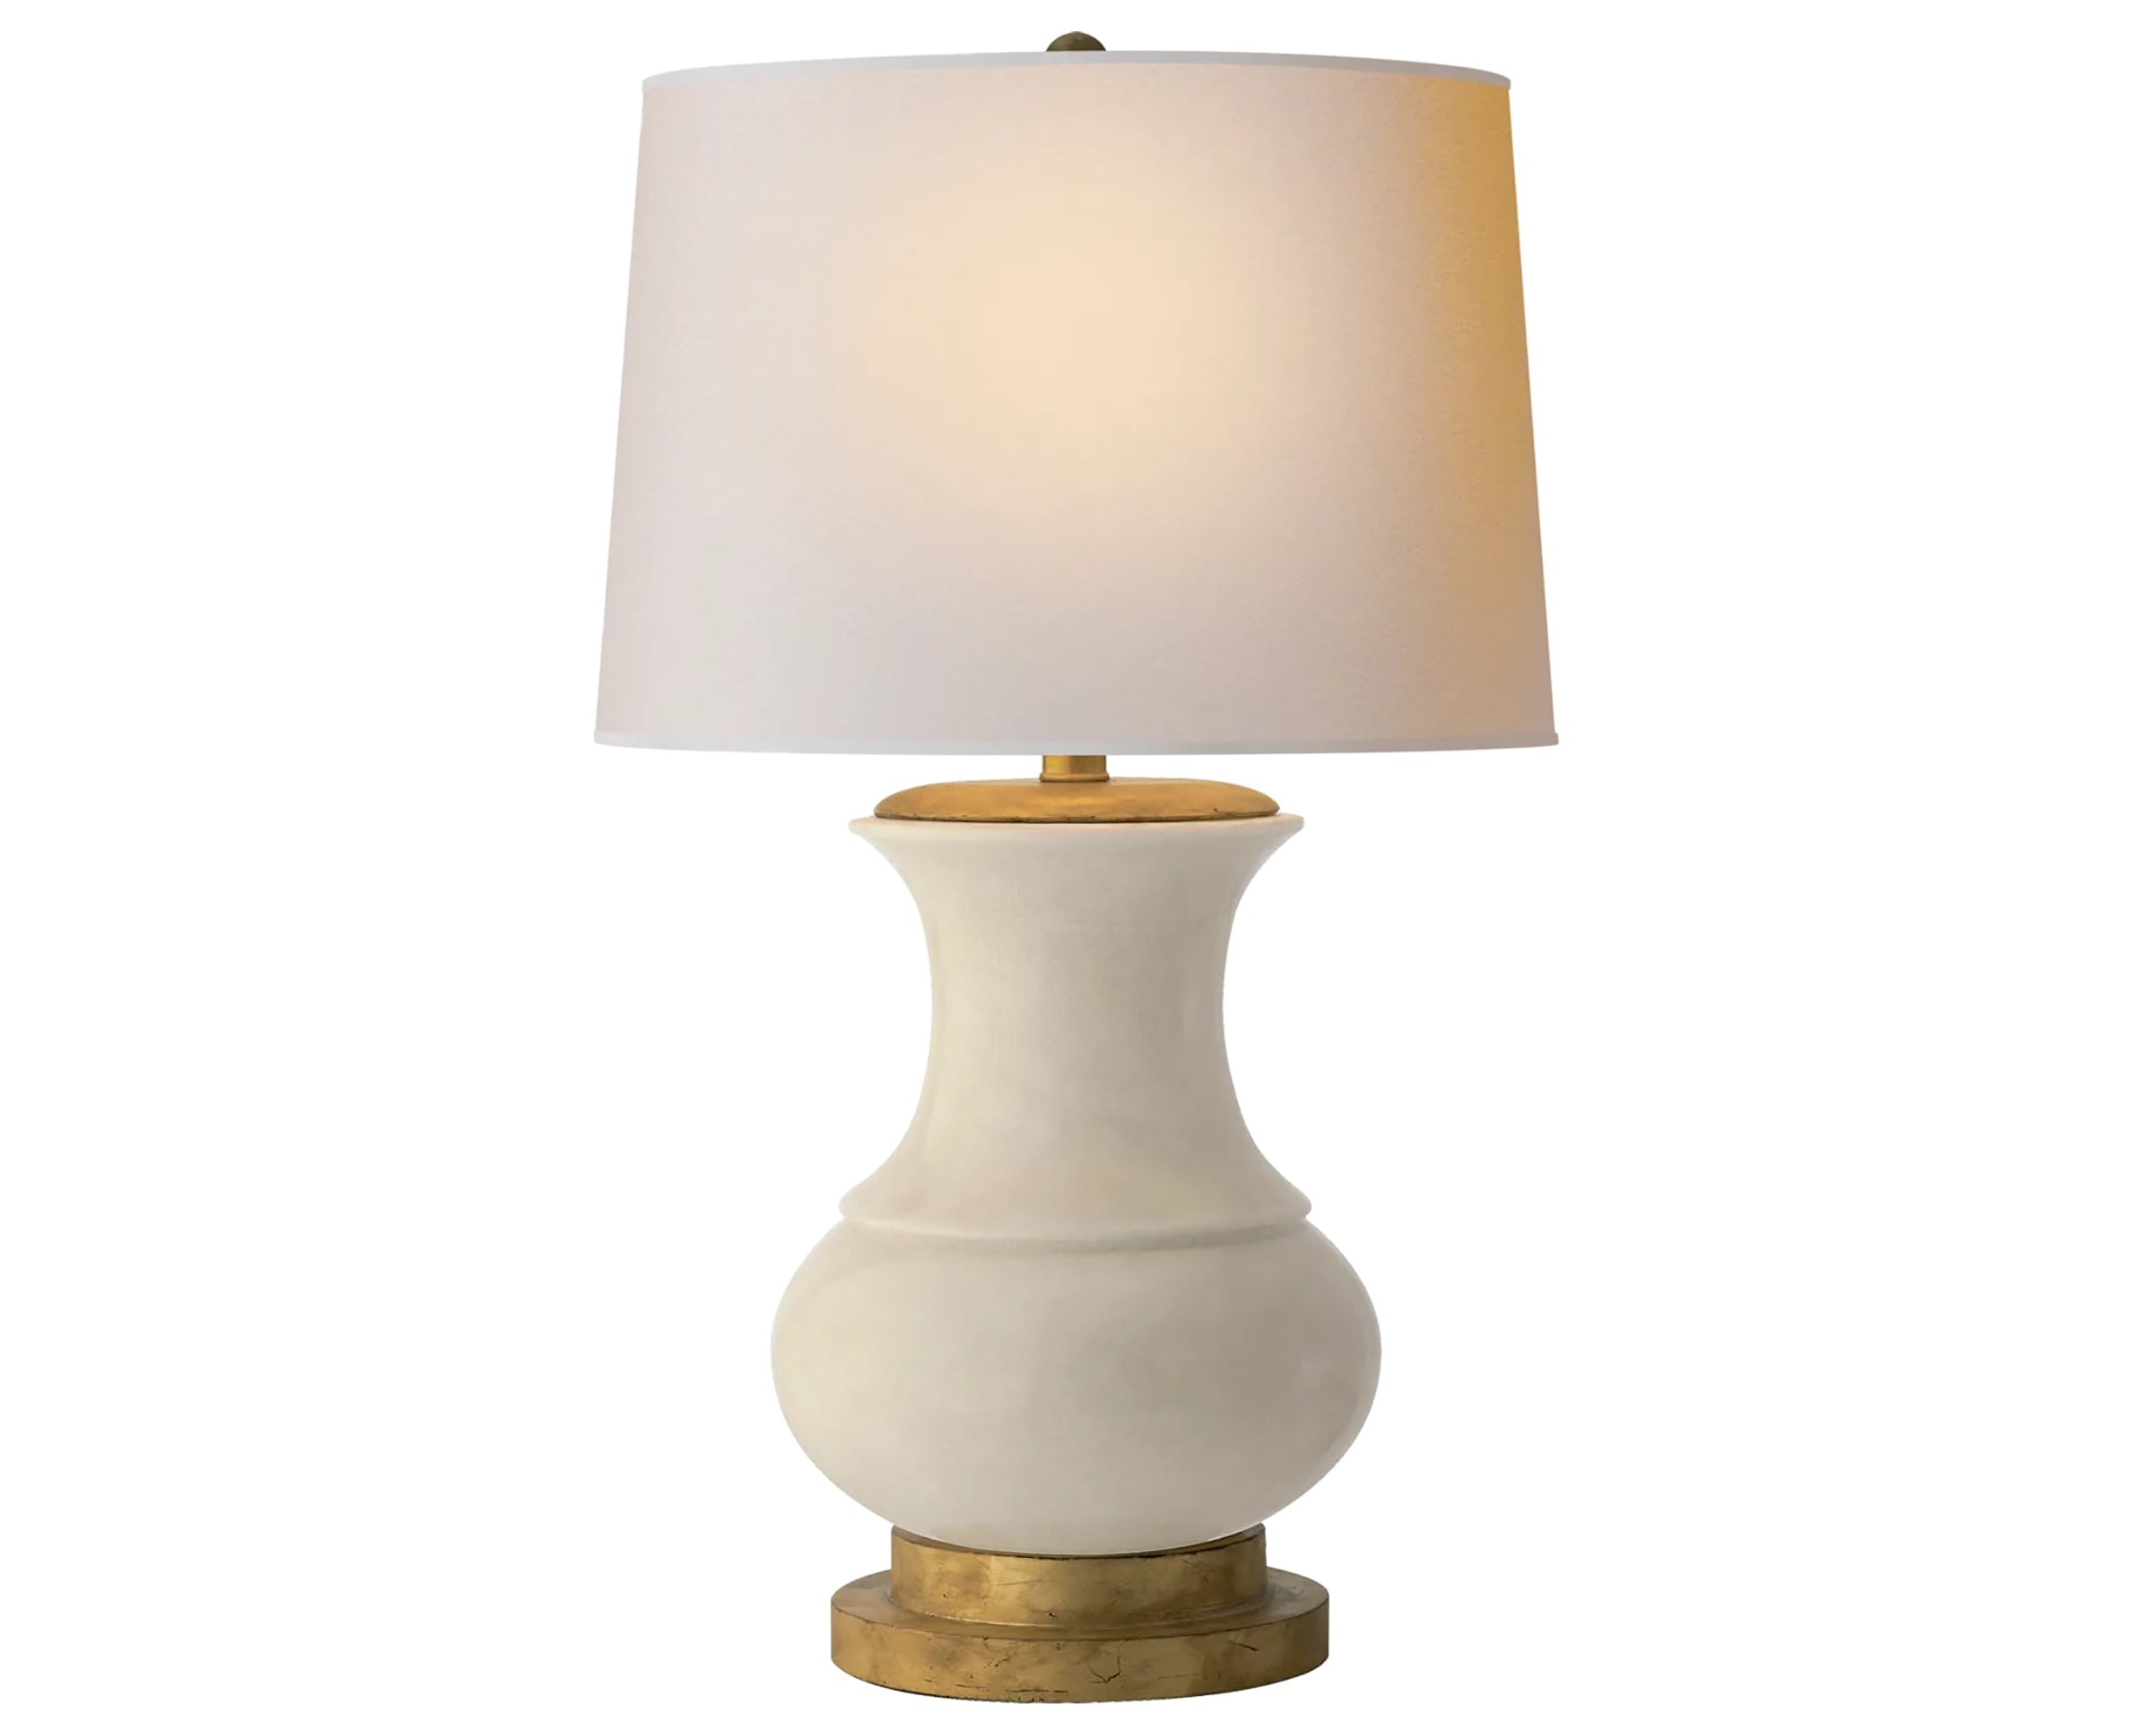 Tea Stain Crackle & Natural Paper | Deauville Table Lamp | Valley Ridge Furniture